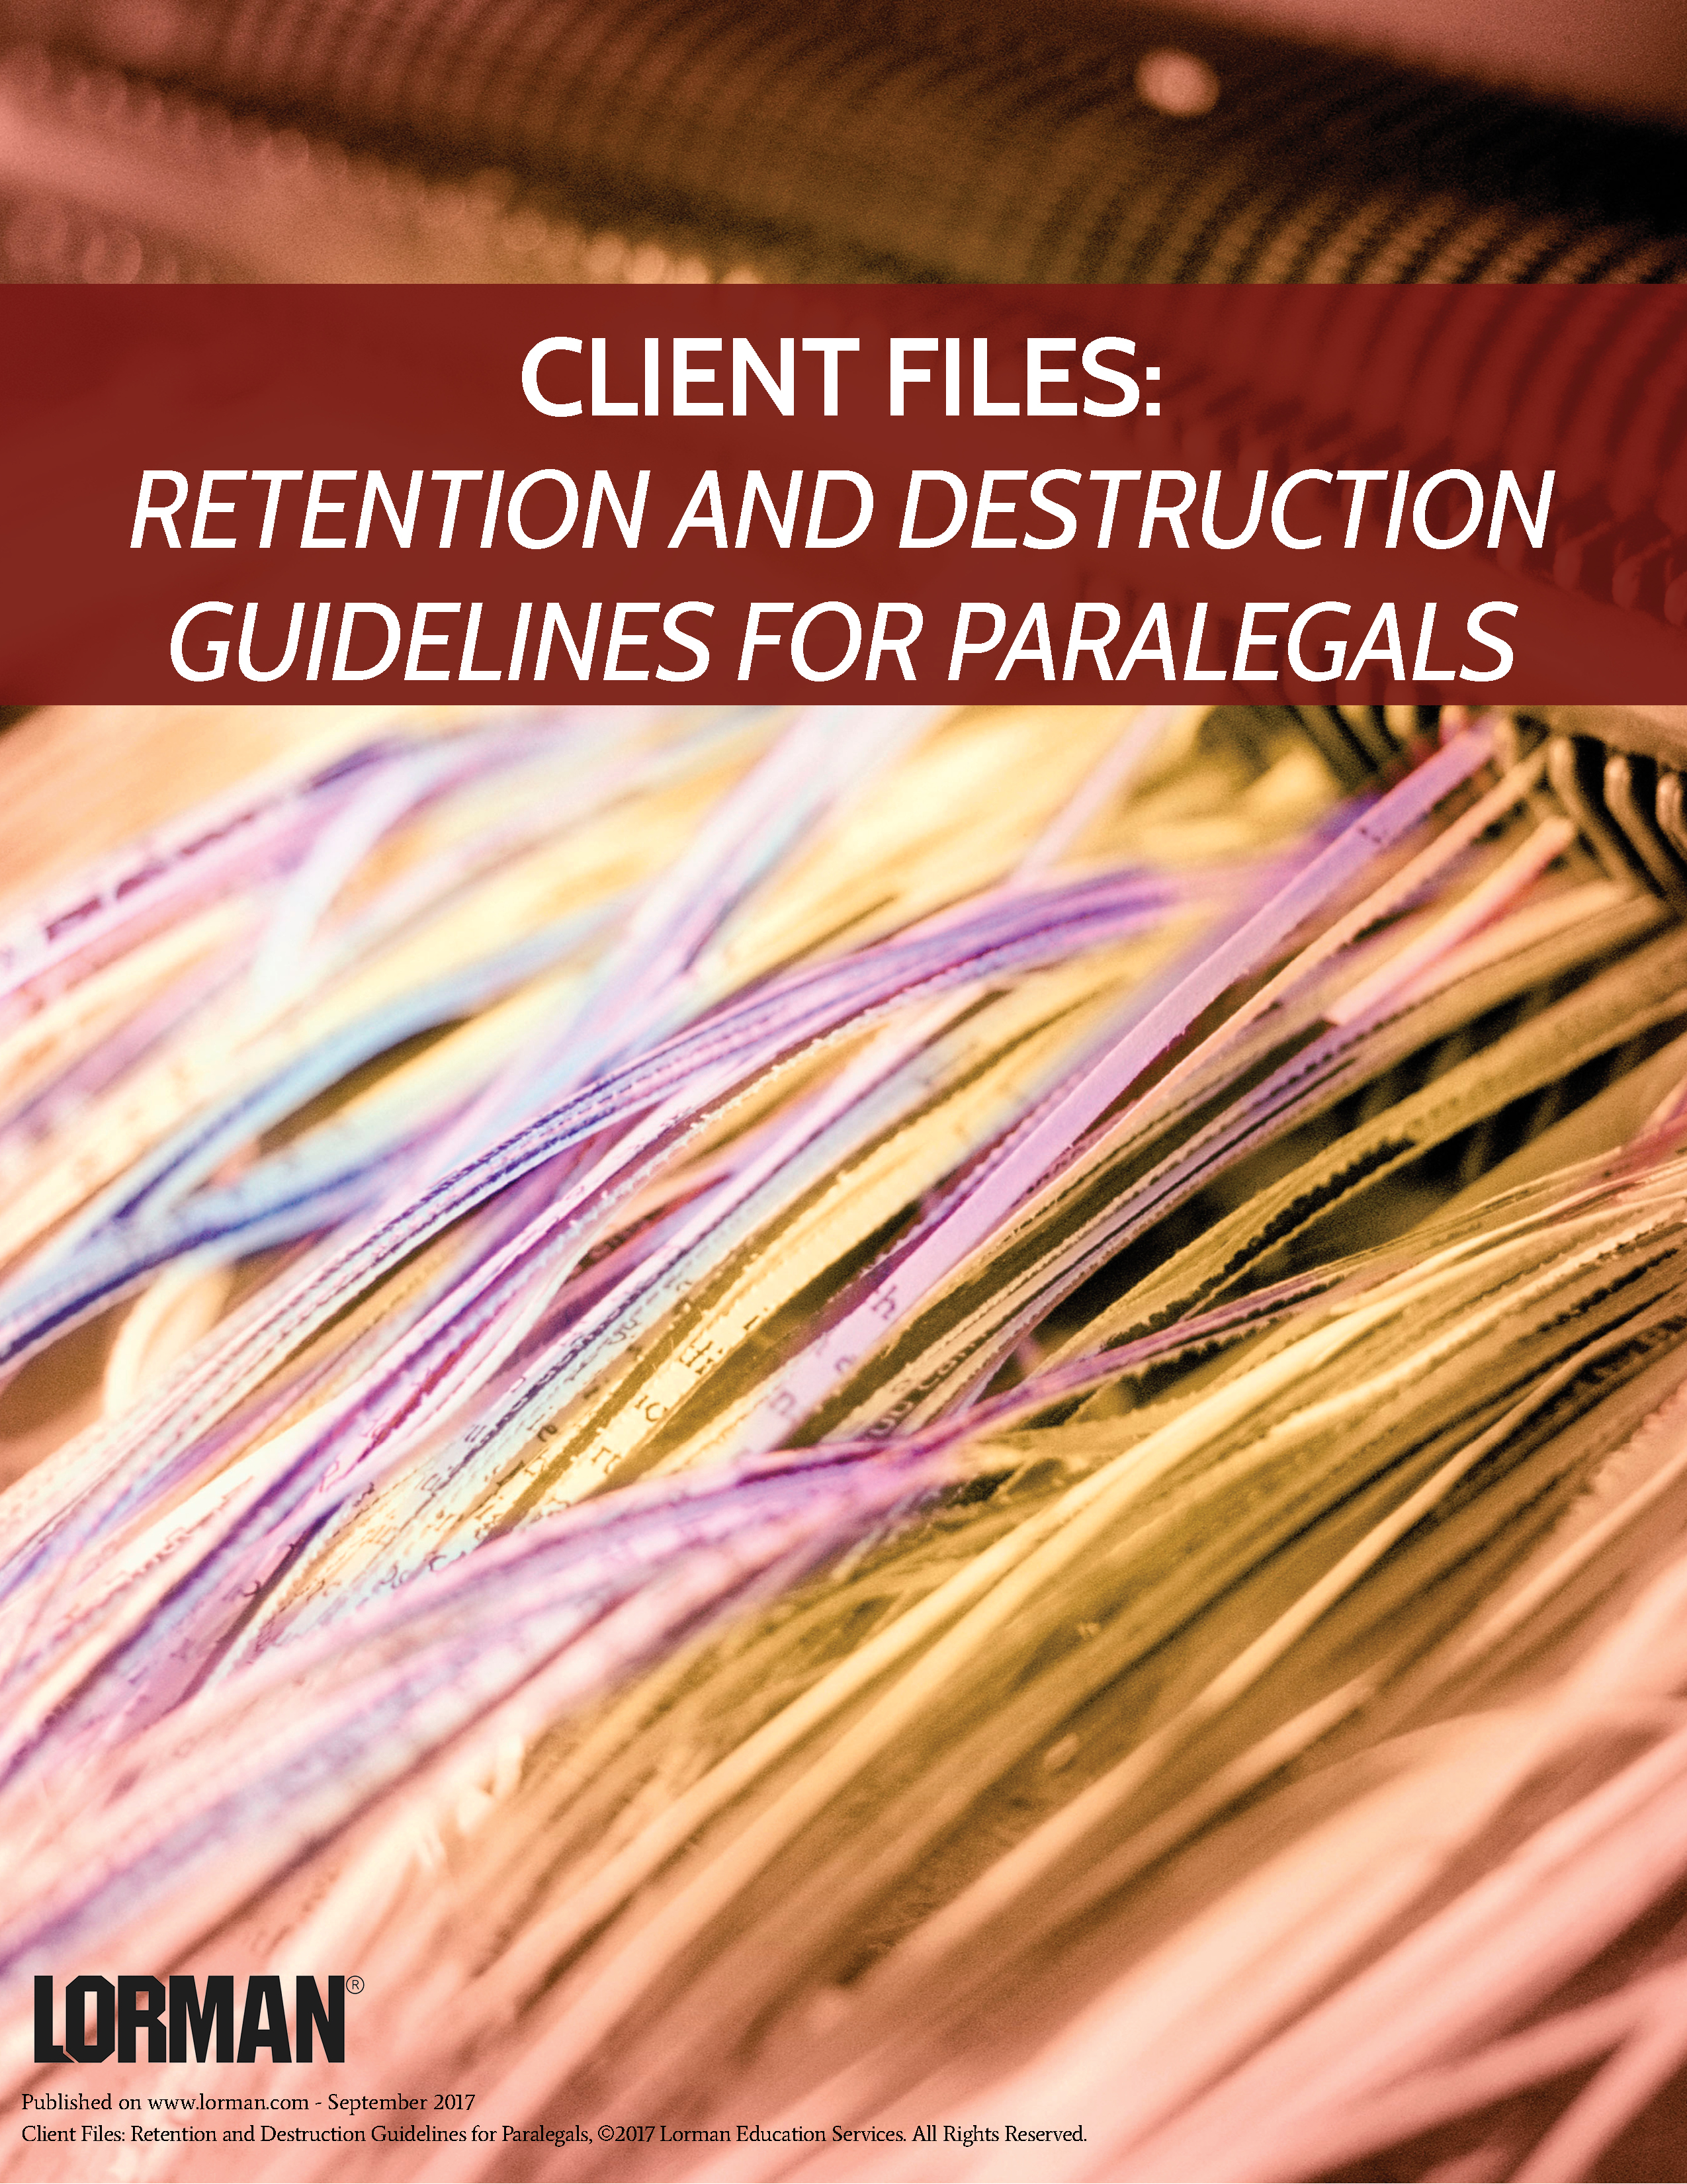 Client Files: Retention and Destruction Guidelines for Paralegals